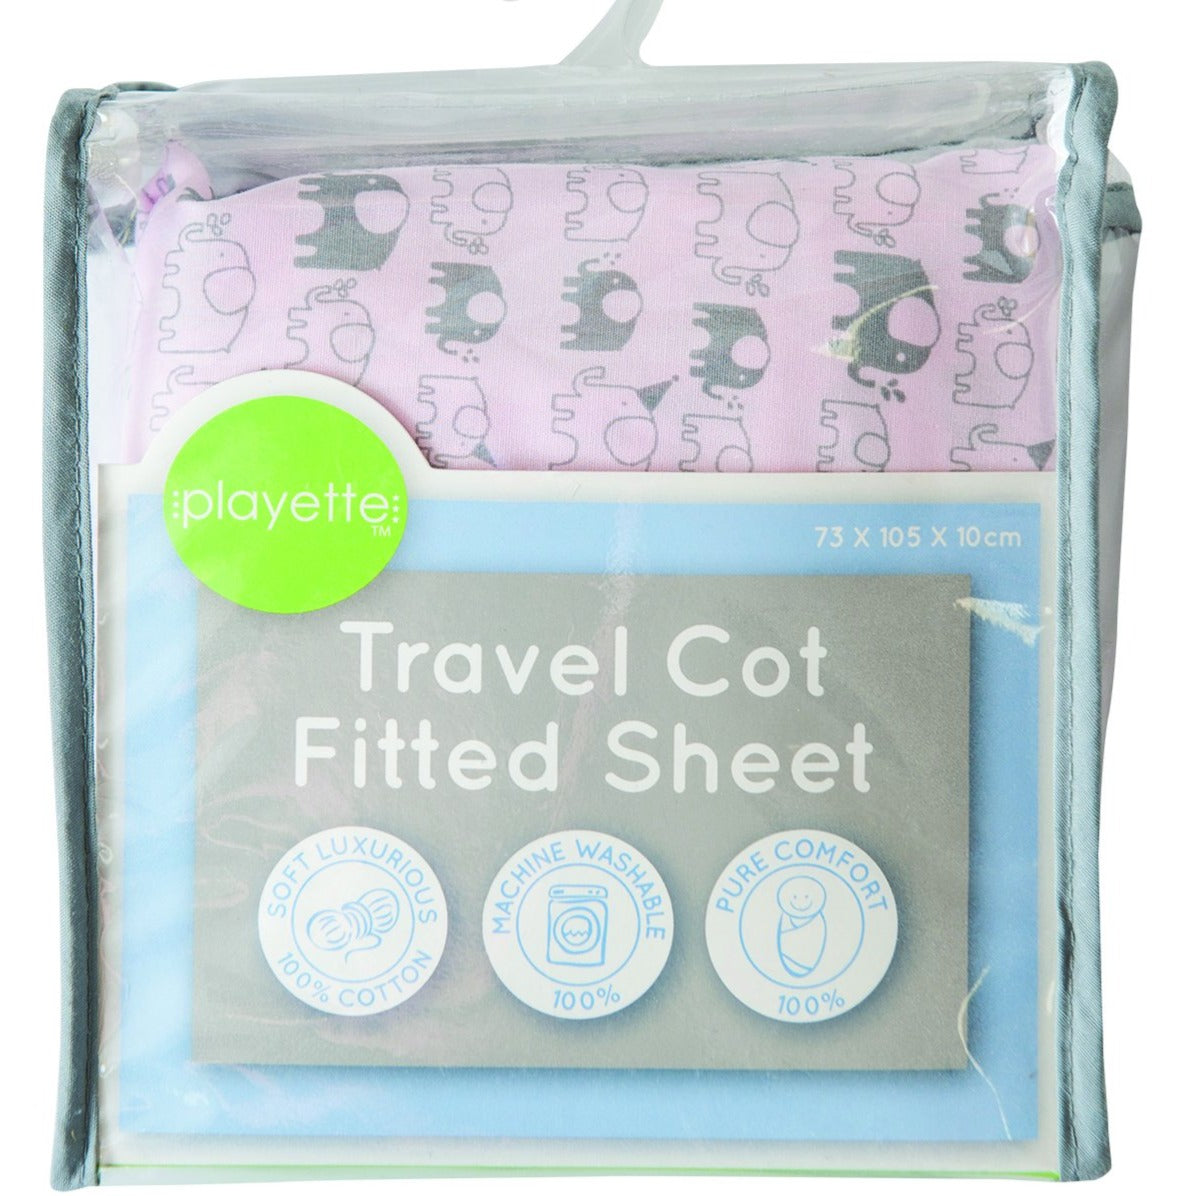 Playette Travel Cot Fitted Sheet - Pink, Printed Elephants